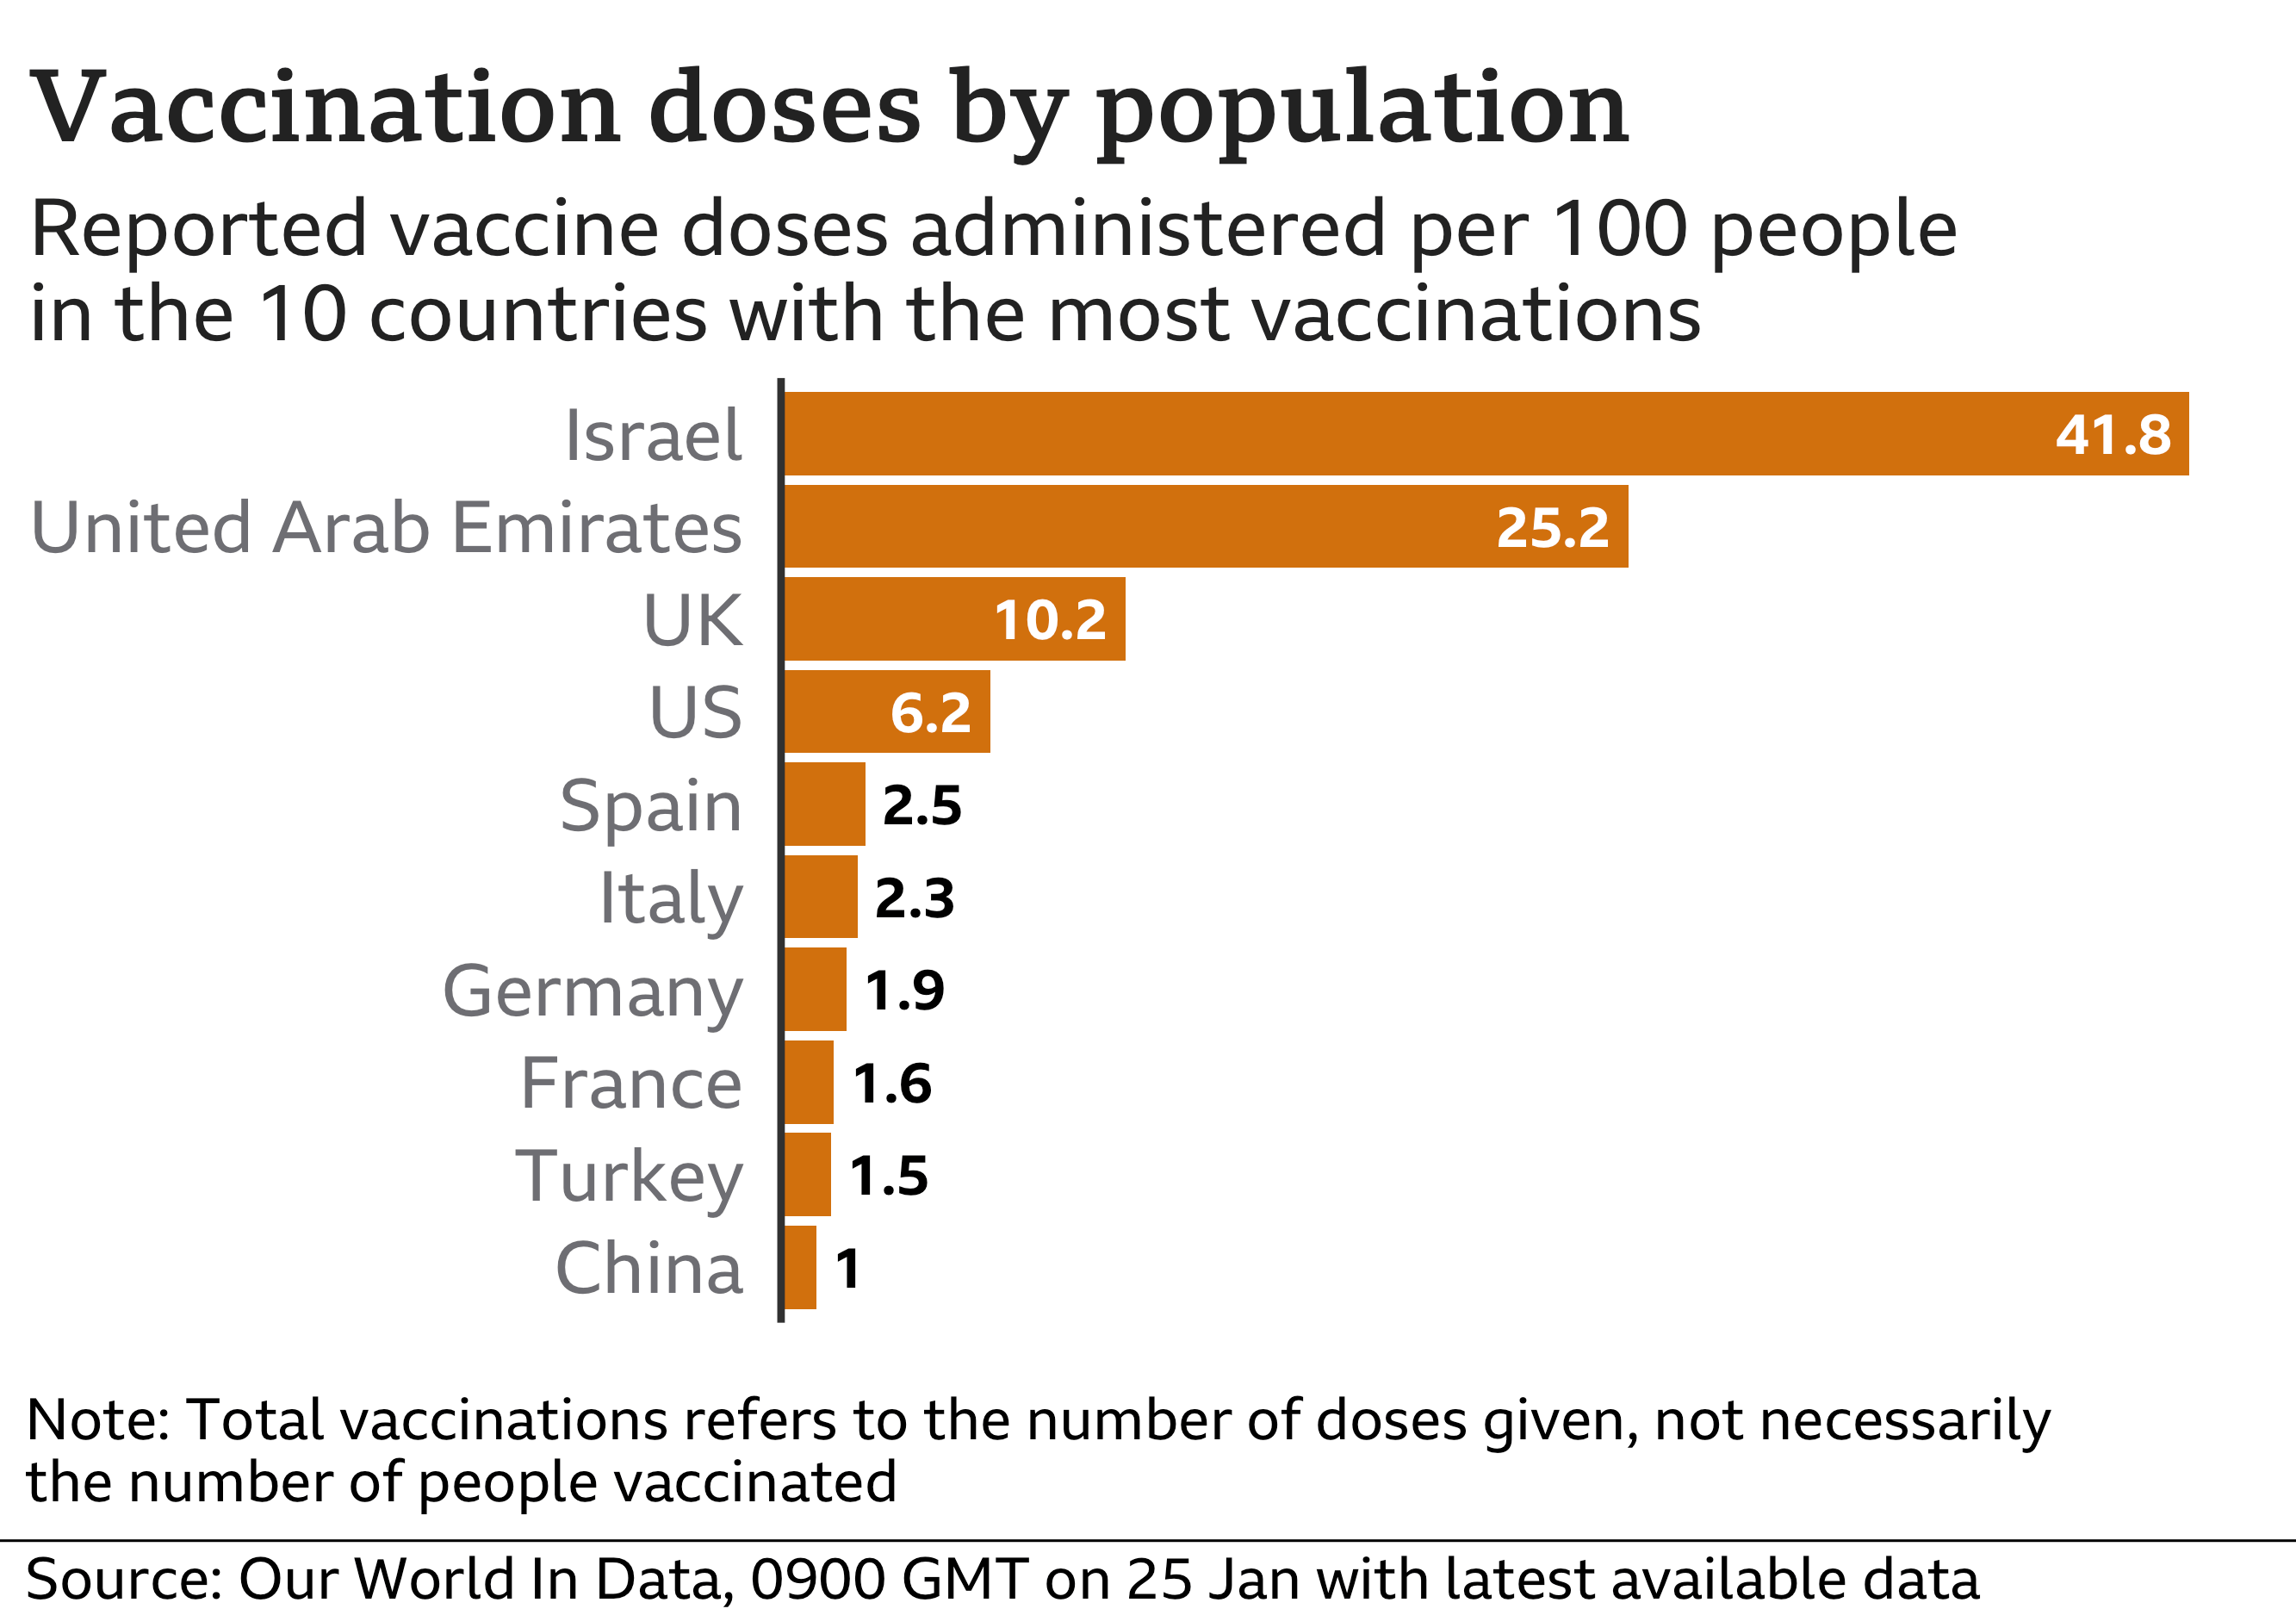 Vaccination doses by population Our World in Data 25-1-2021 - enlarge